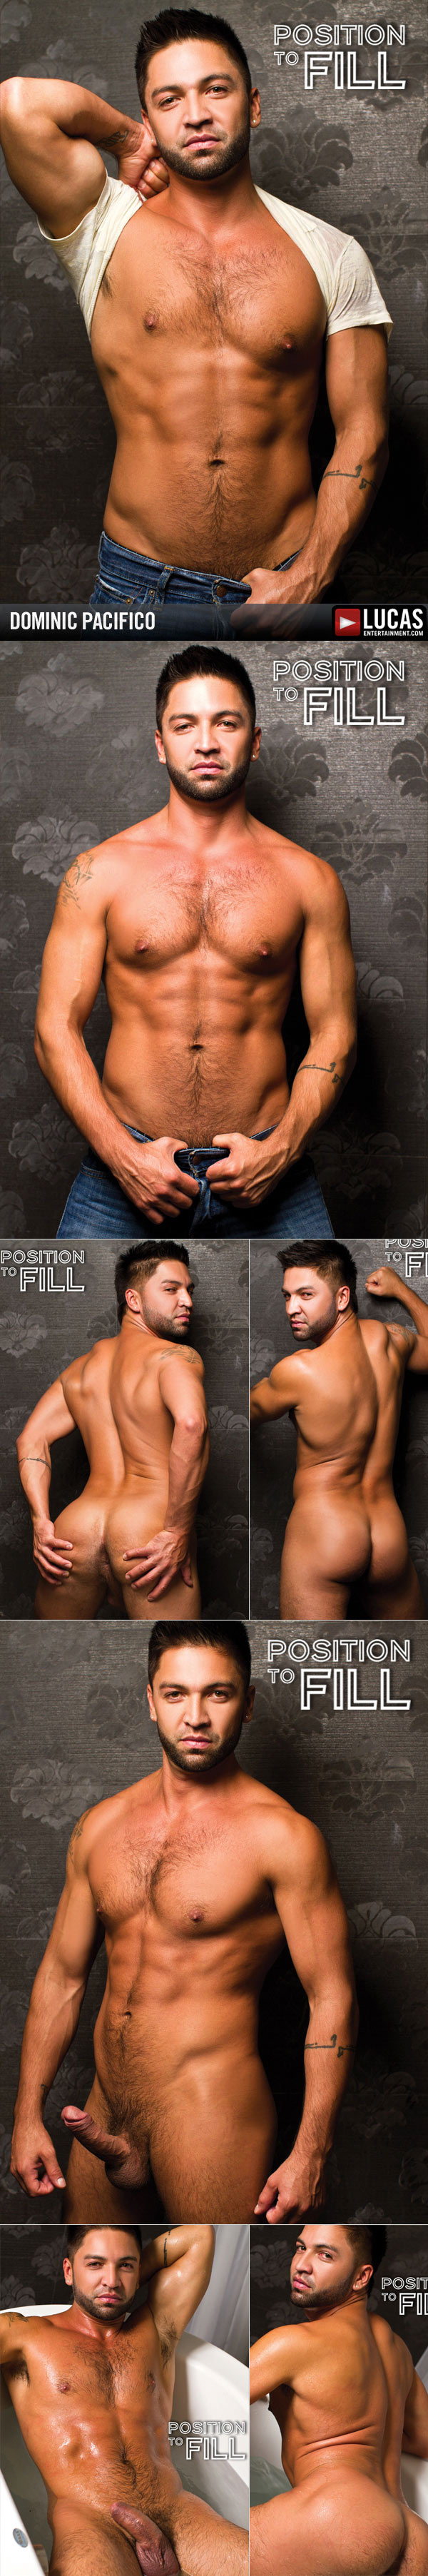 Position To Fill (Johnny Venture & Dominic Pacifico) at LucasEntertainment.com